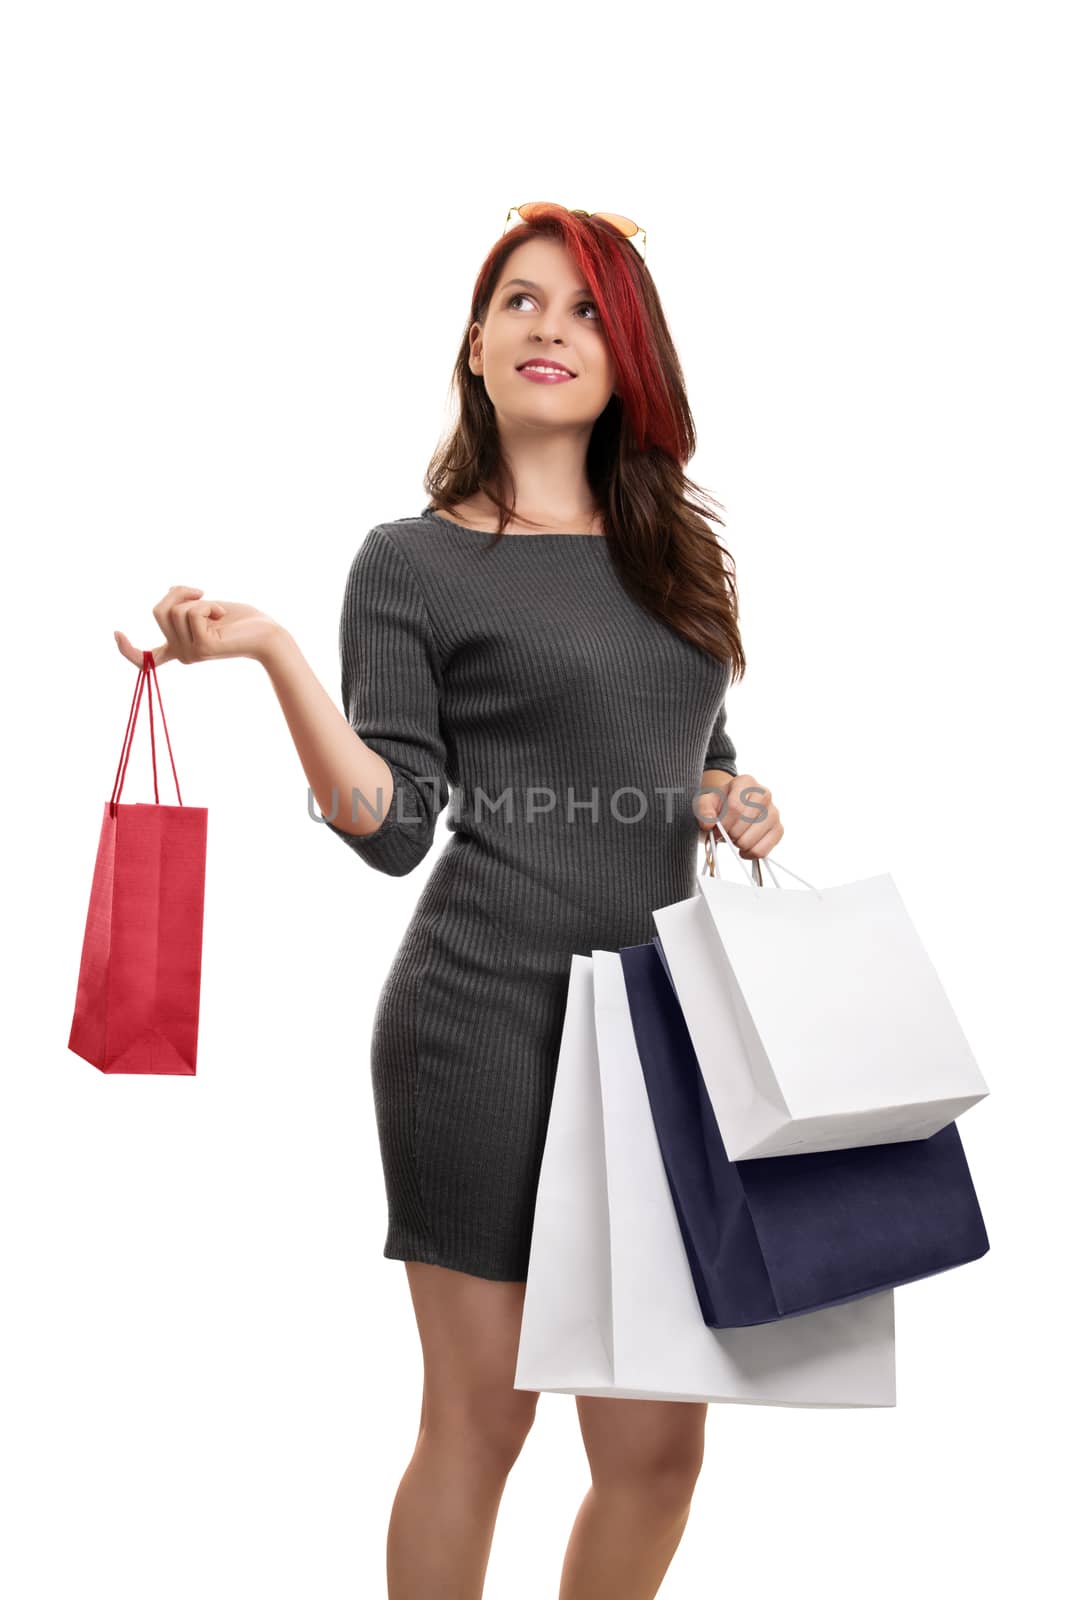 Girl in a shopping spree. A portrait of an excited beautiful young girl in a dress, holding a lot of shopping bags, isolated on white background. Girl thinking what to buy next.